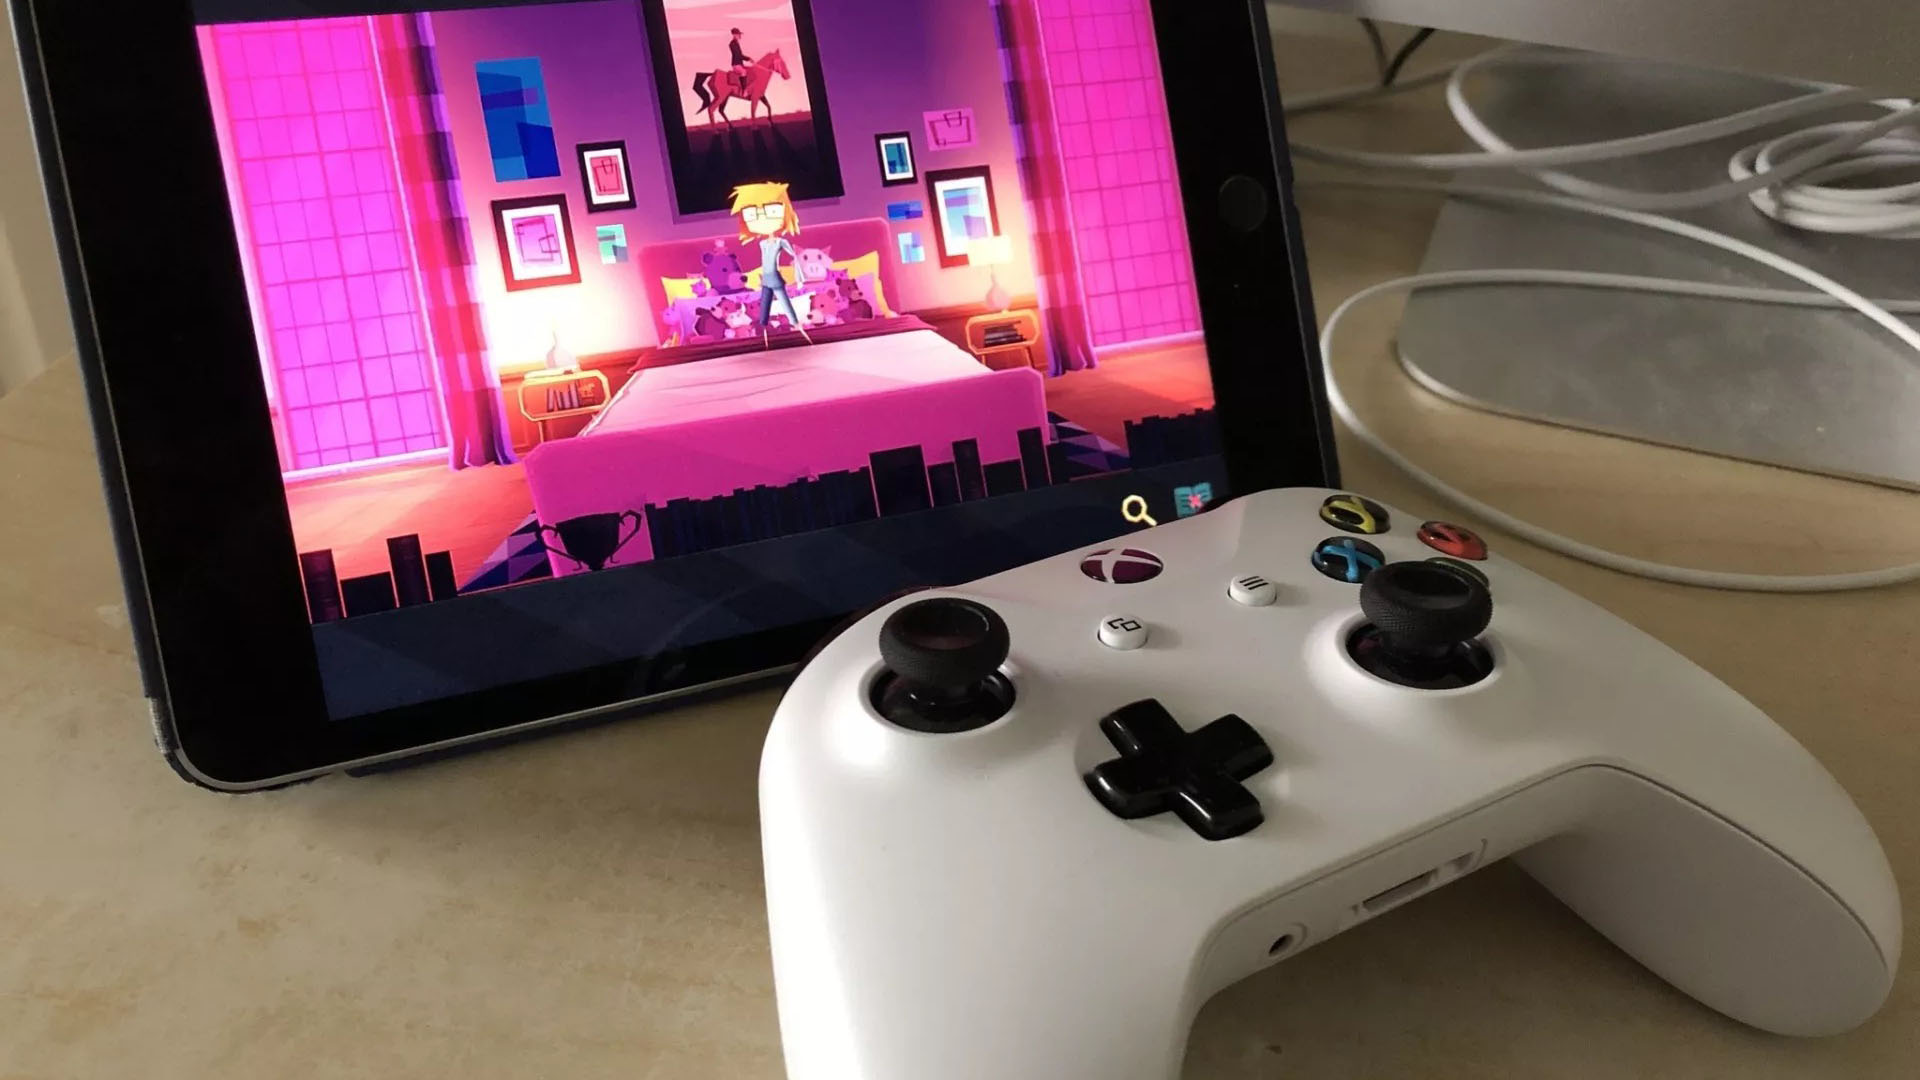 Forget the Xbox Series S, someone's shoved a PC into an Xbox One S